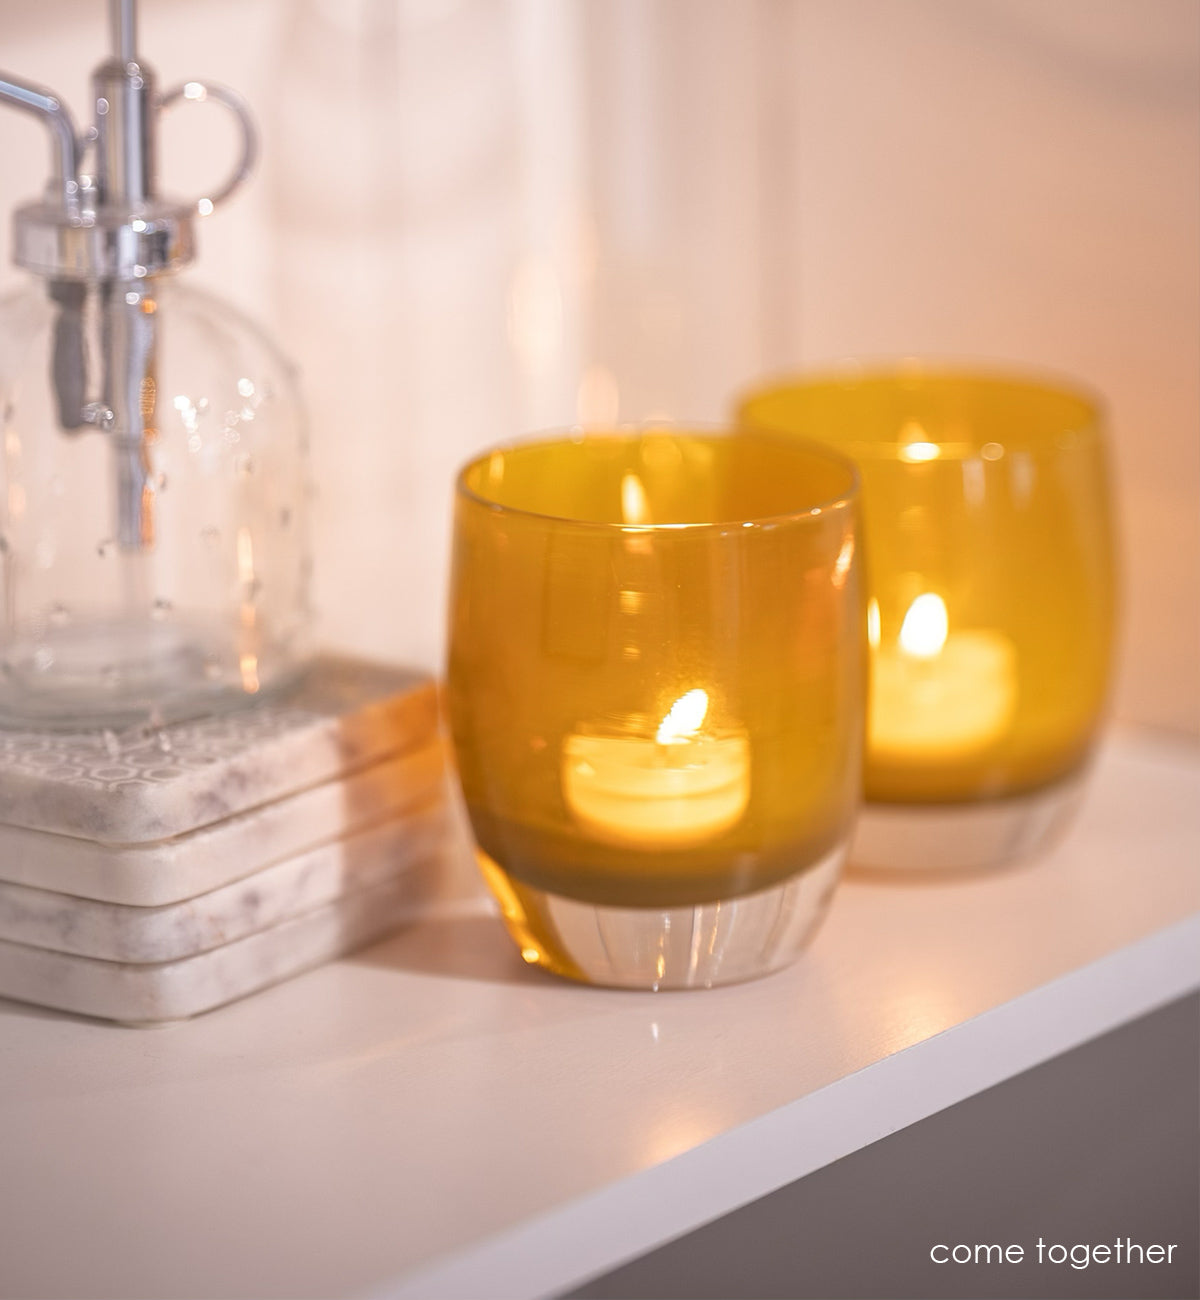 beautiful amber colored hand-blown glass candle holder. creates an ambiance inspired to come together when the tea-light is lit inside.